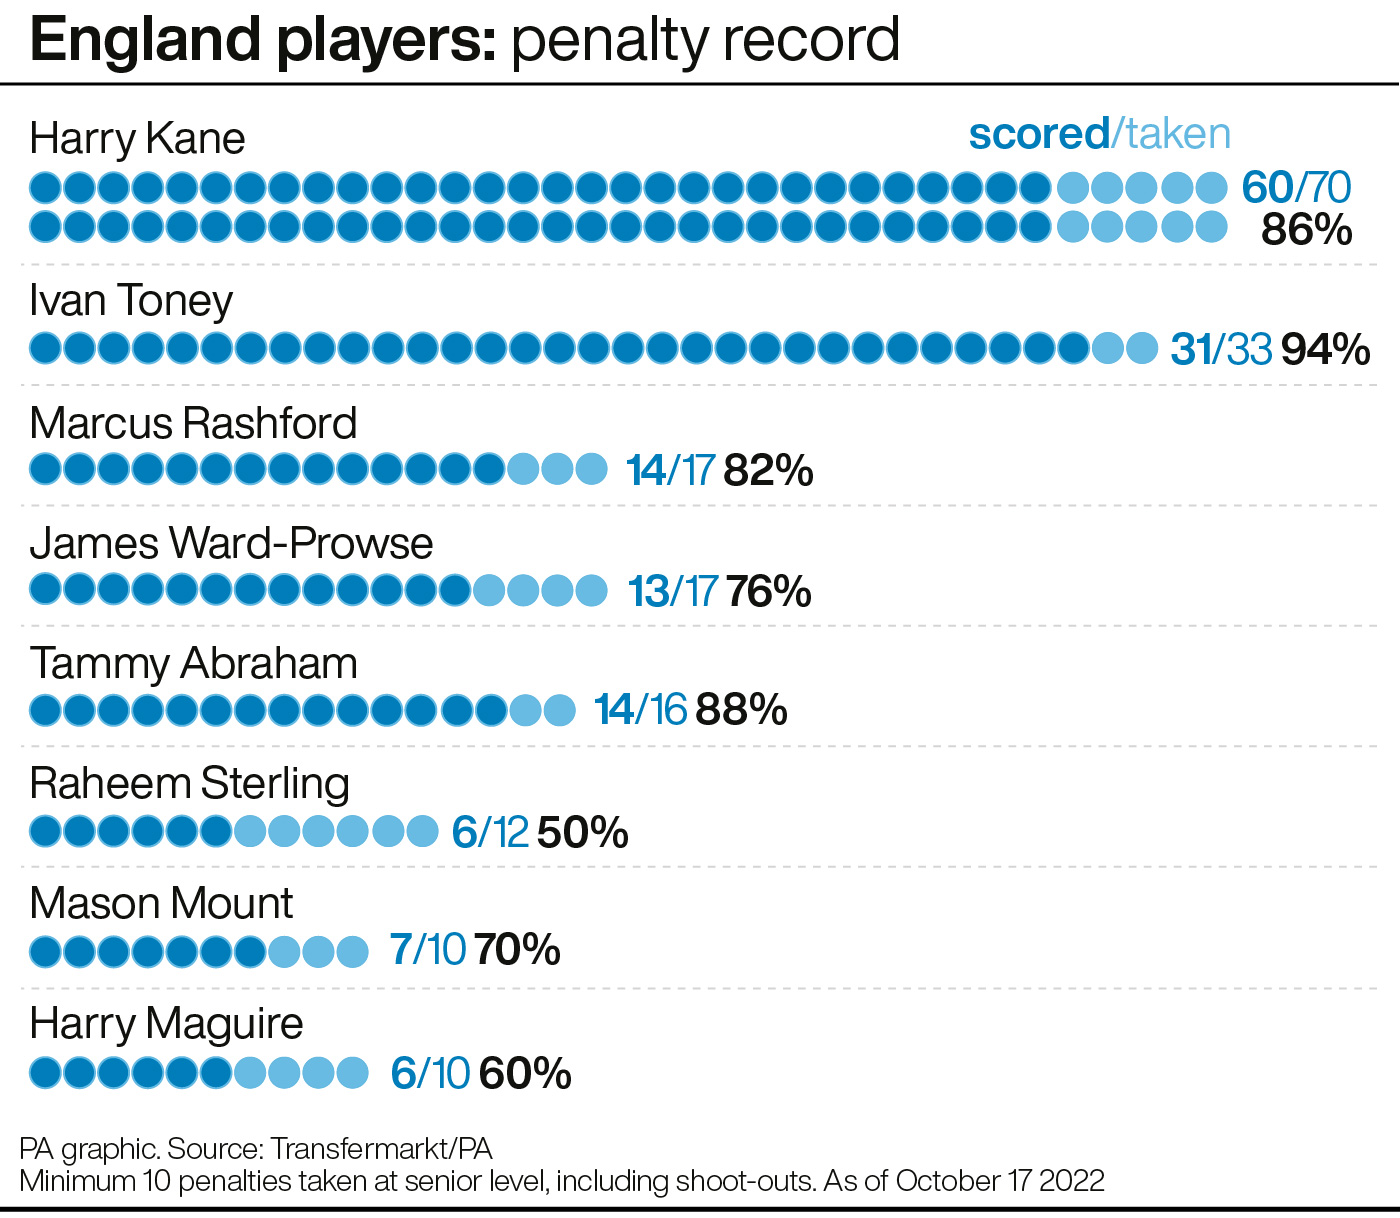 England players: penalty record